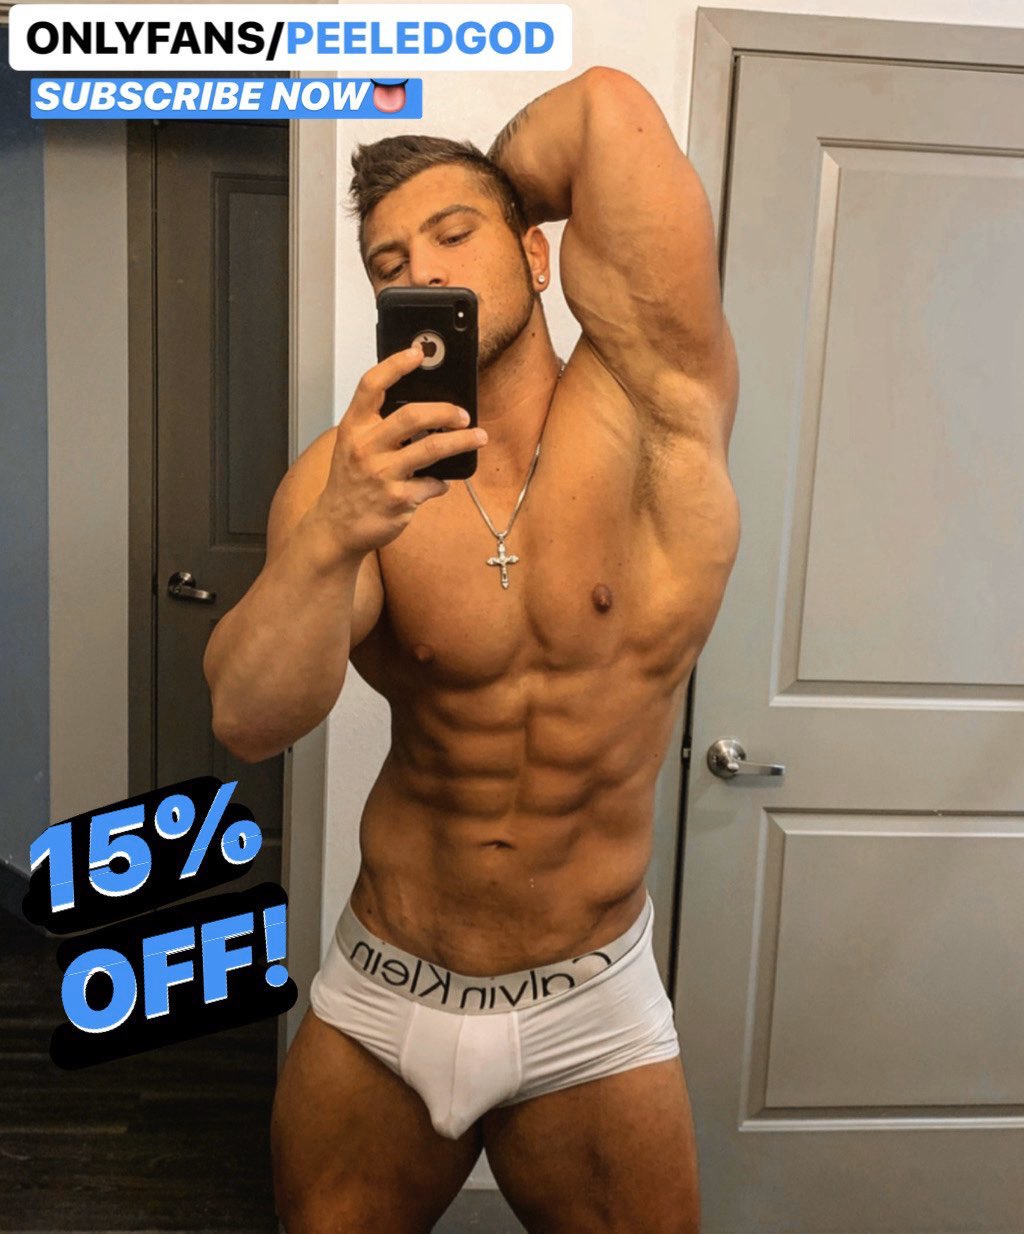 Searcg onlyfans How to